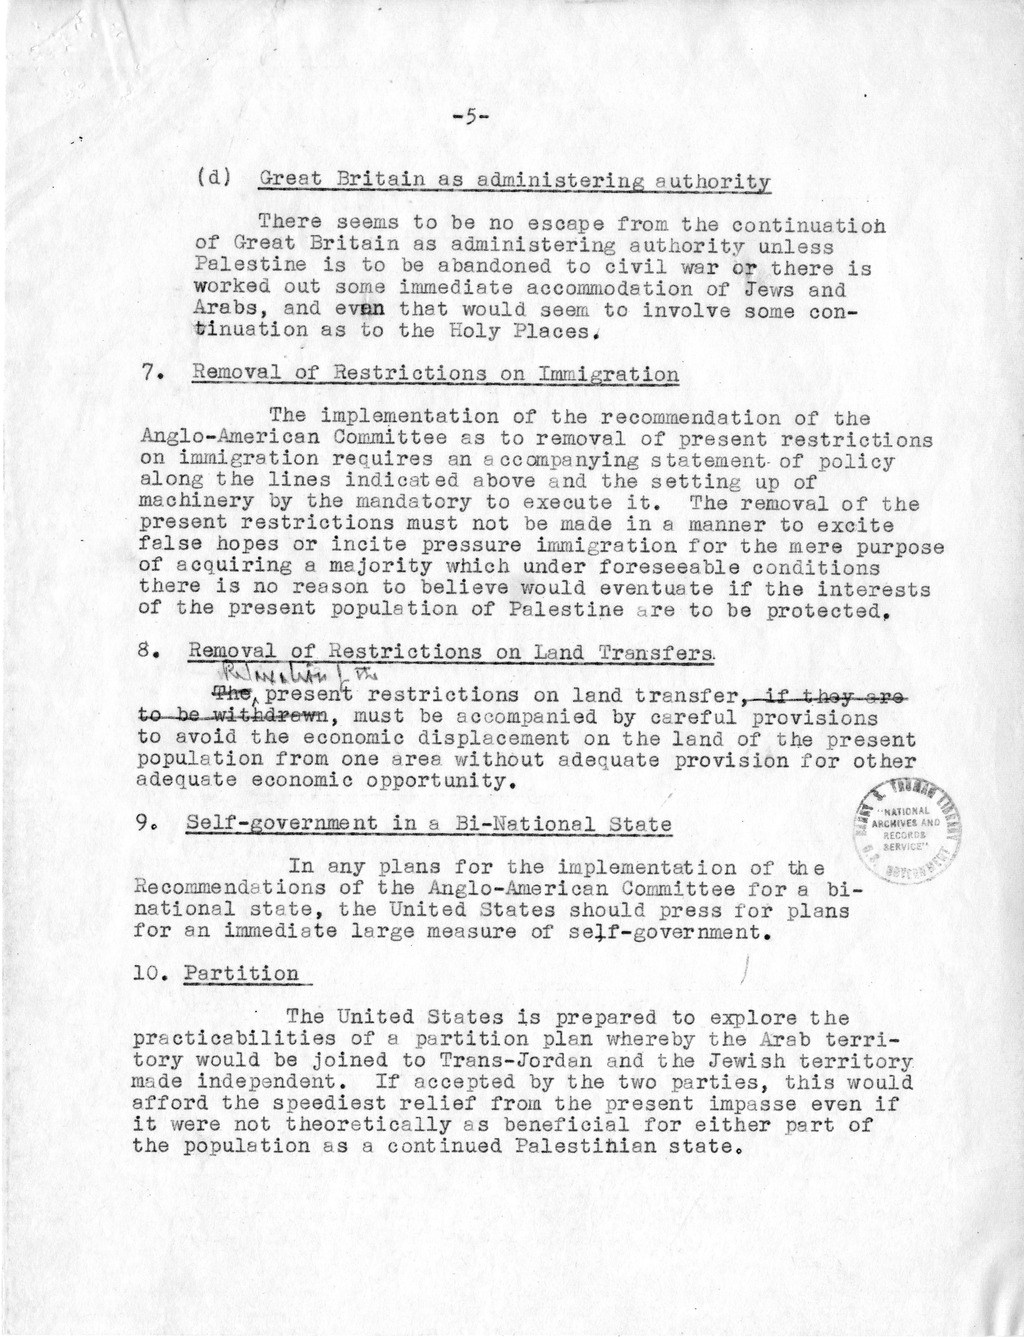 Memorandum of Instructions to the Committee Discussing Palestine - London Conference